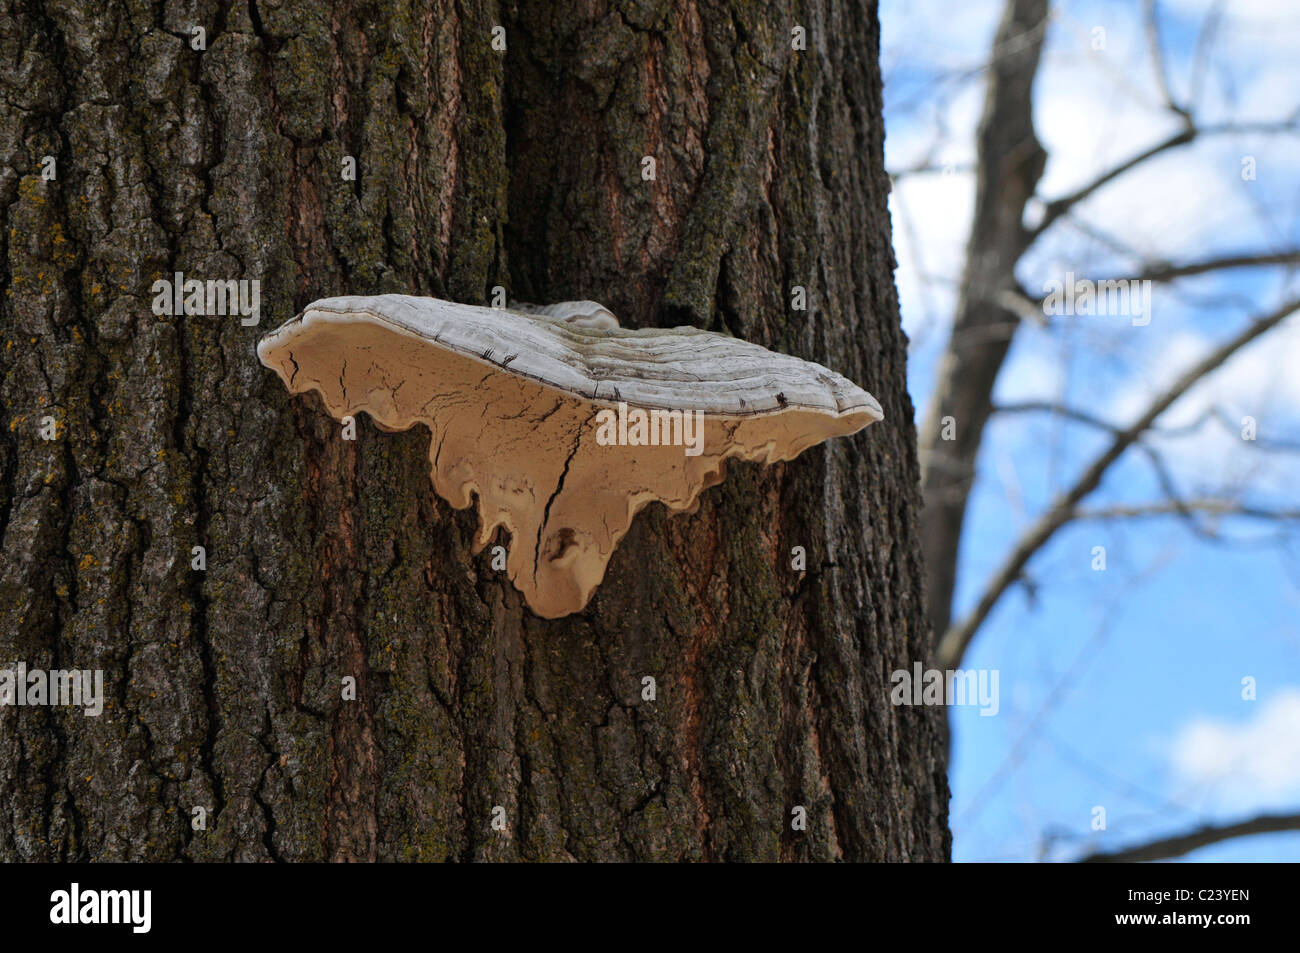 A large wild mushroom growing on the trunk of a tree in Mystic, Quebec, Canada. Stock Photo